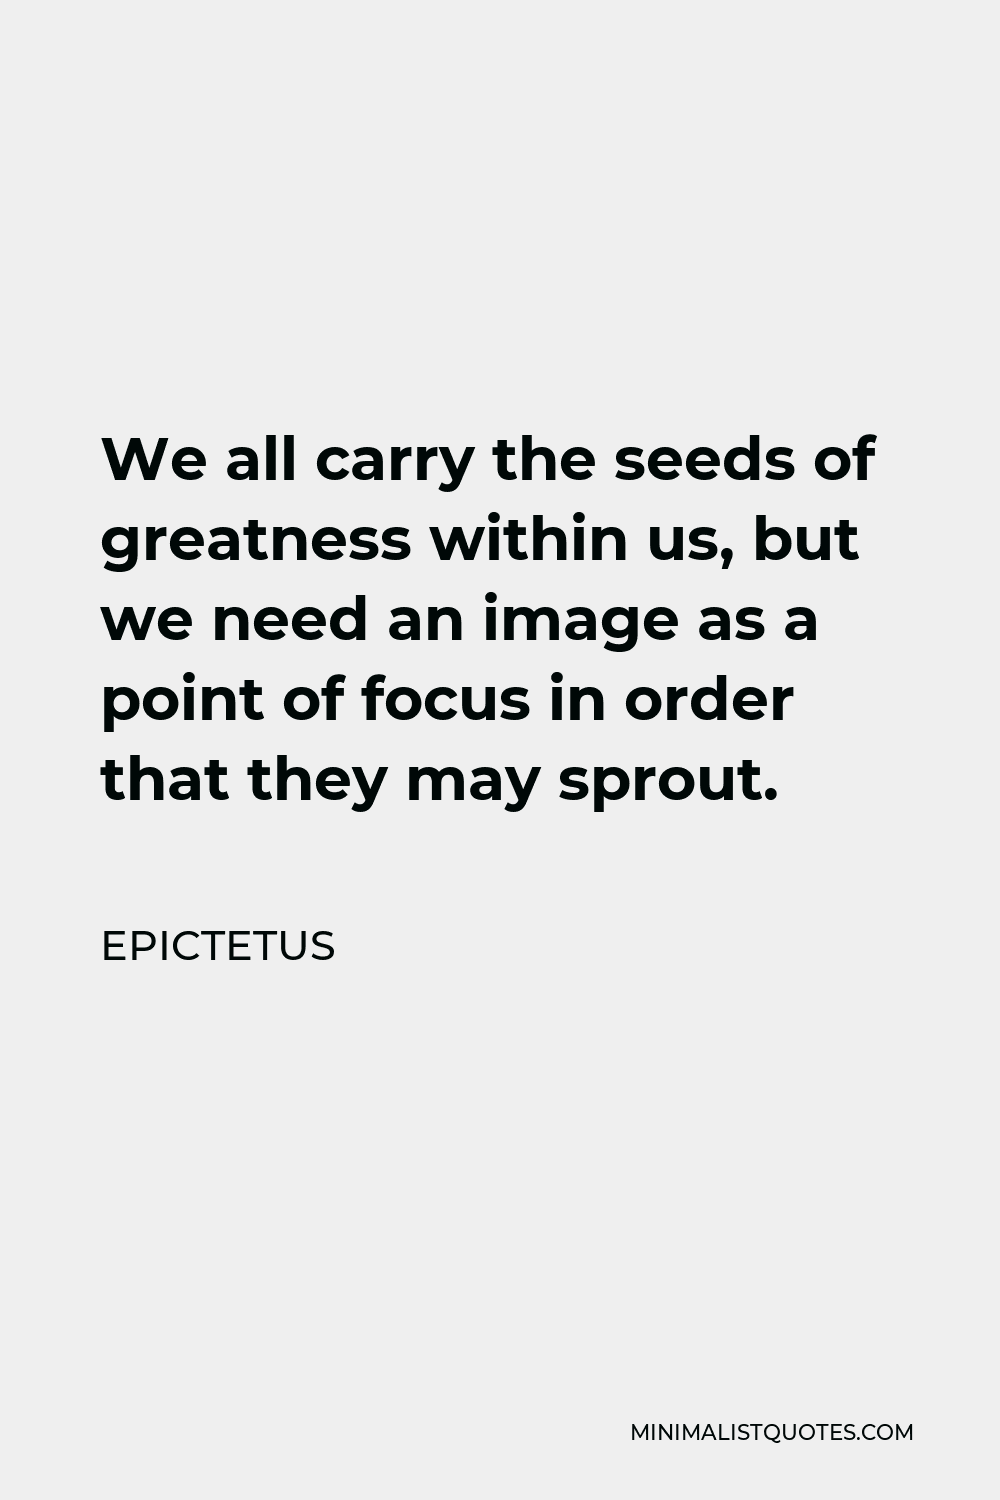 Epictetus Quote - We all carry the seeds of greatness within us, but we need an image as a point of focus in order that they may sprout.